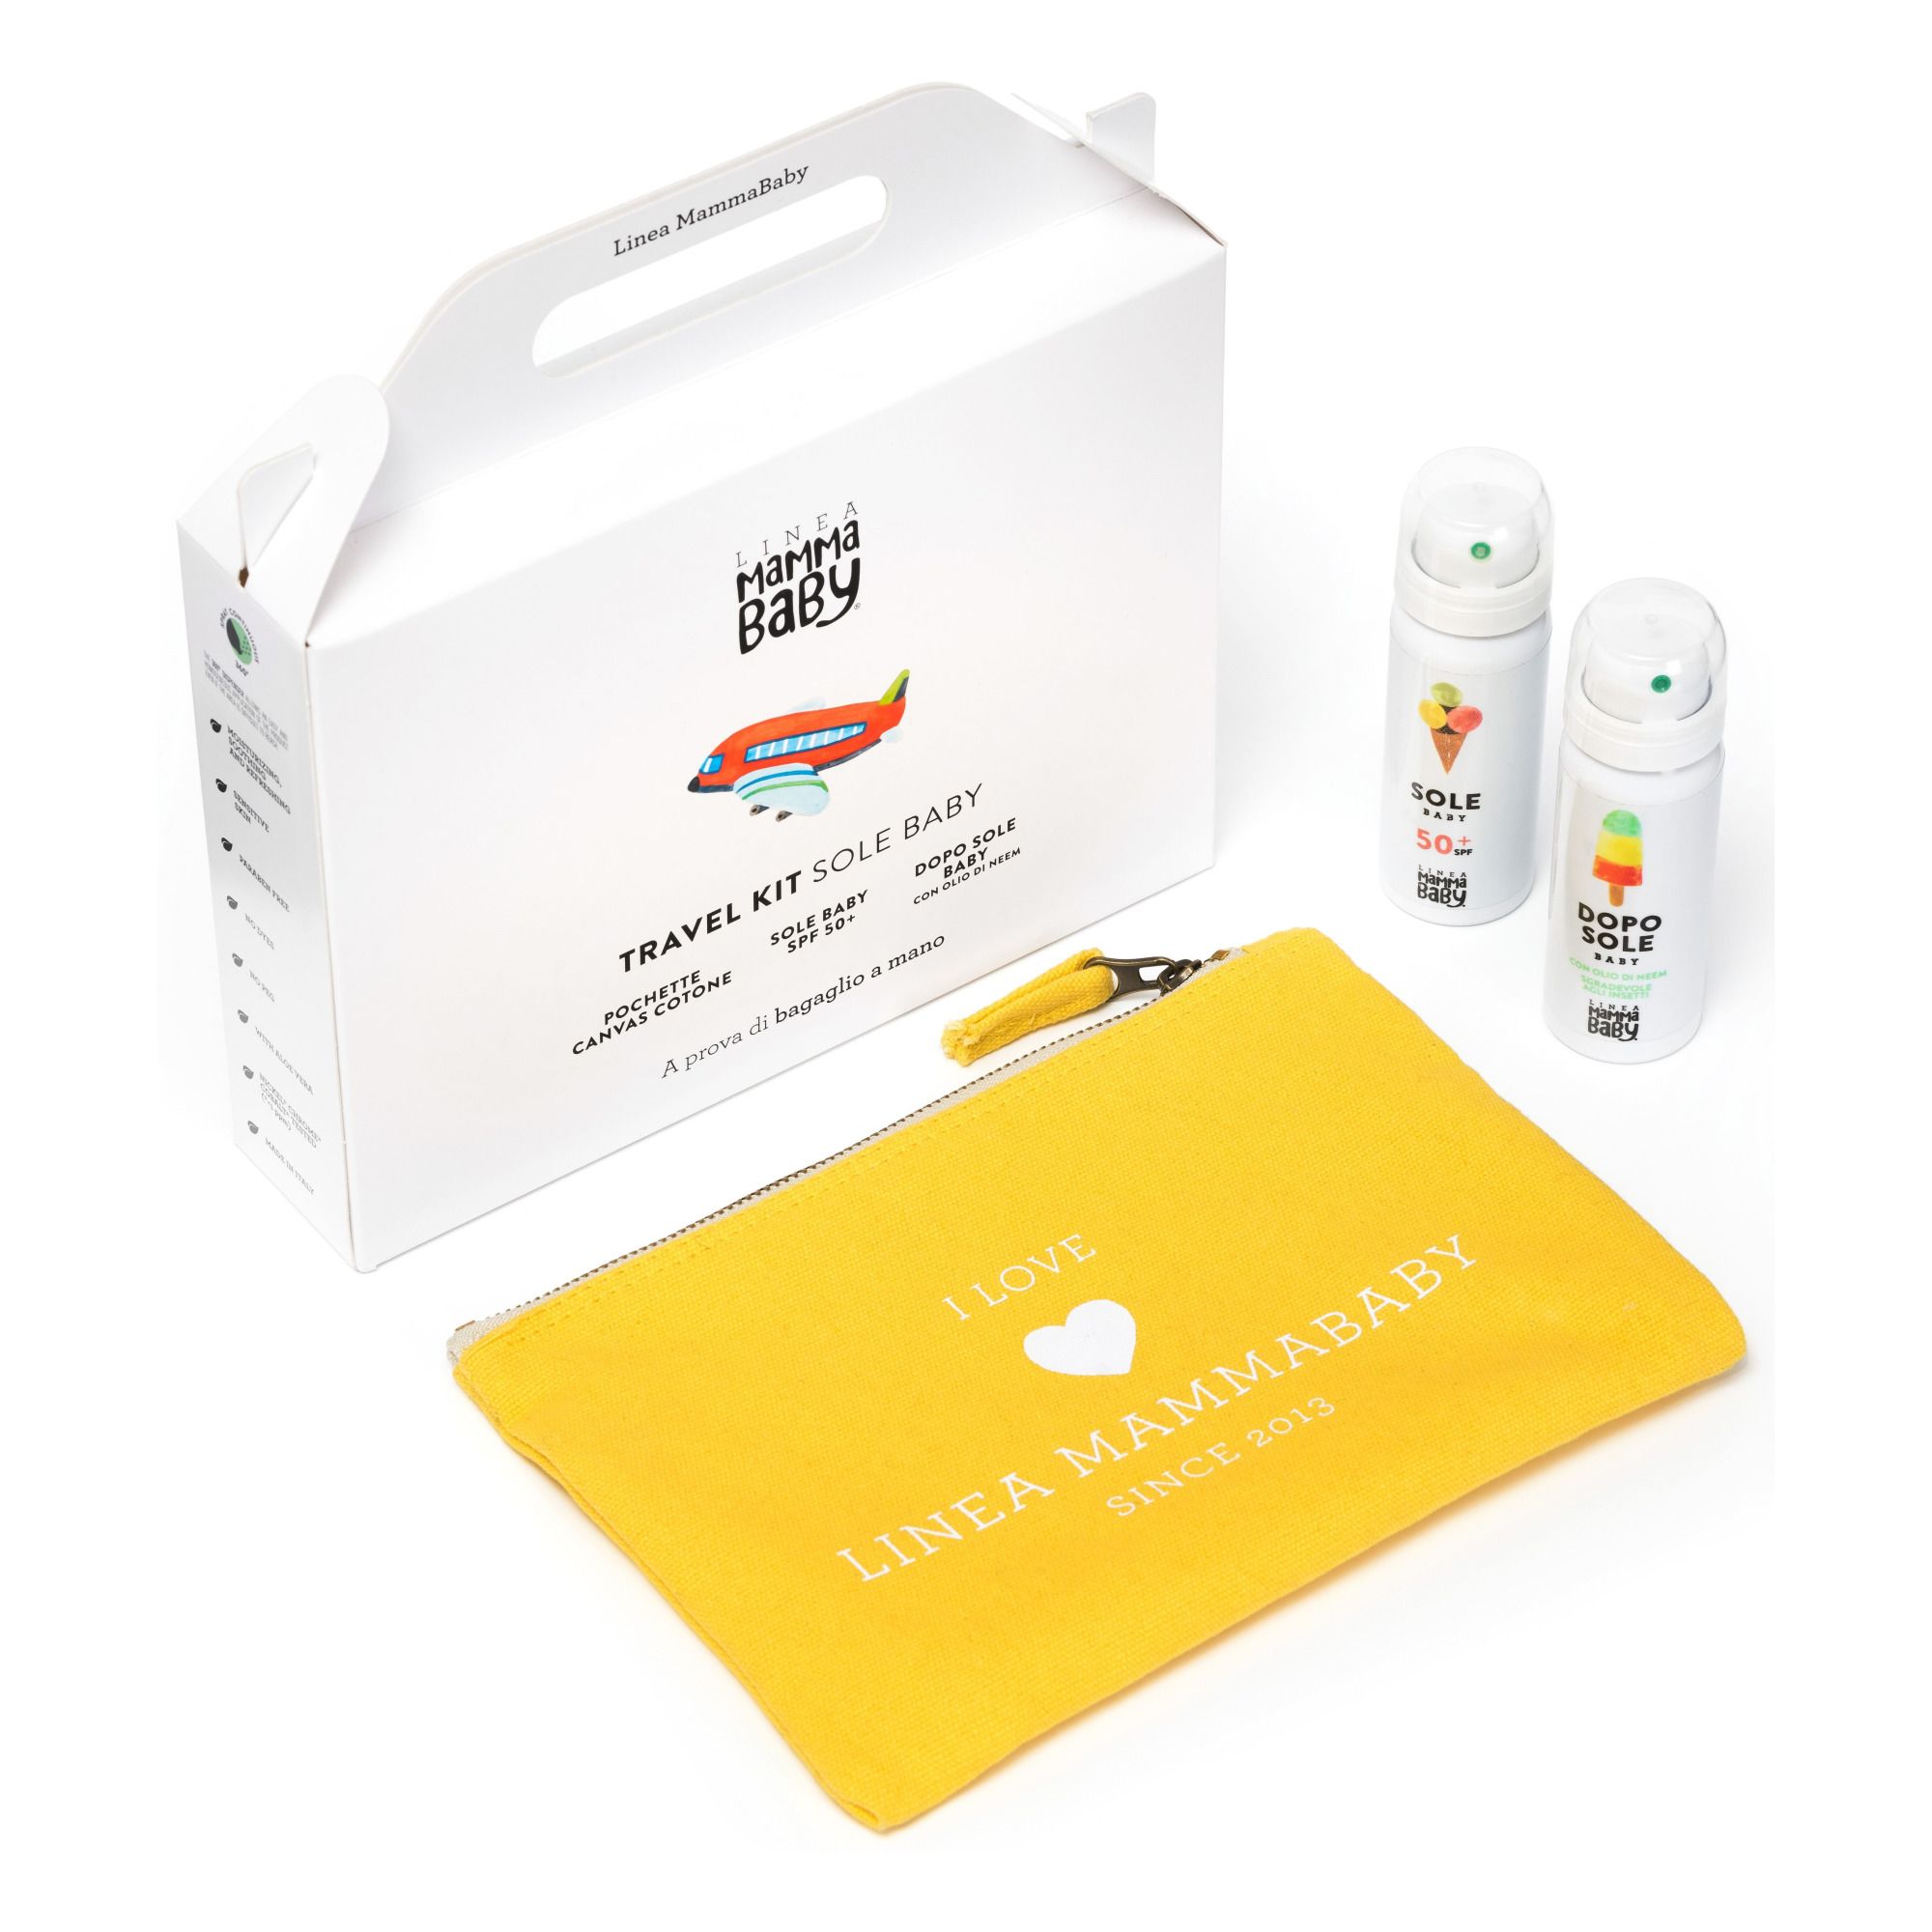 Linea MammaBaby - Travel set crème solaire - 25ml - Blanc